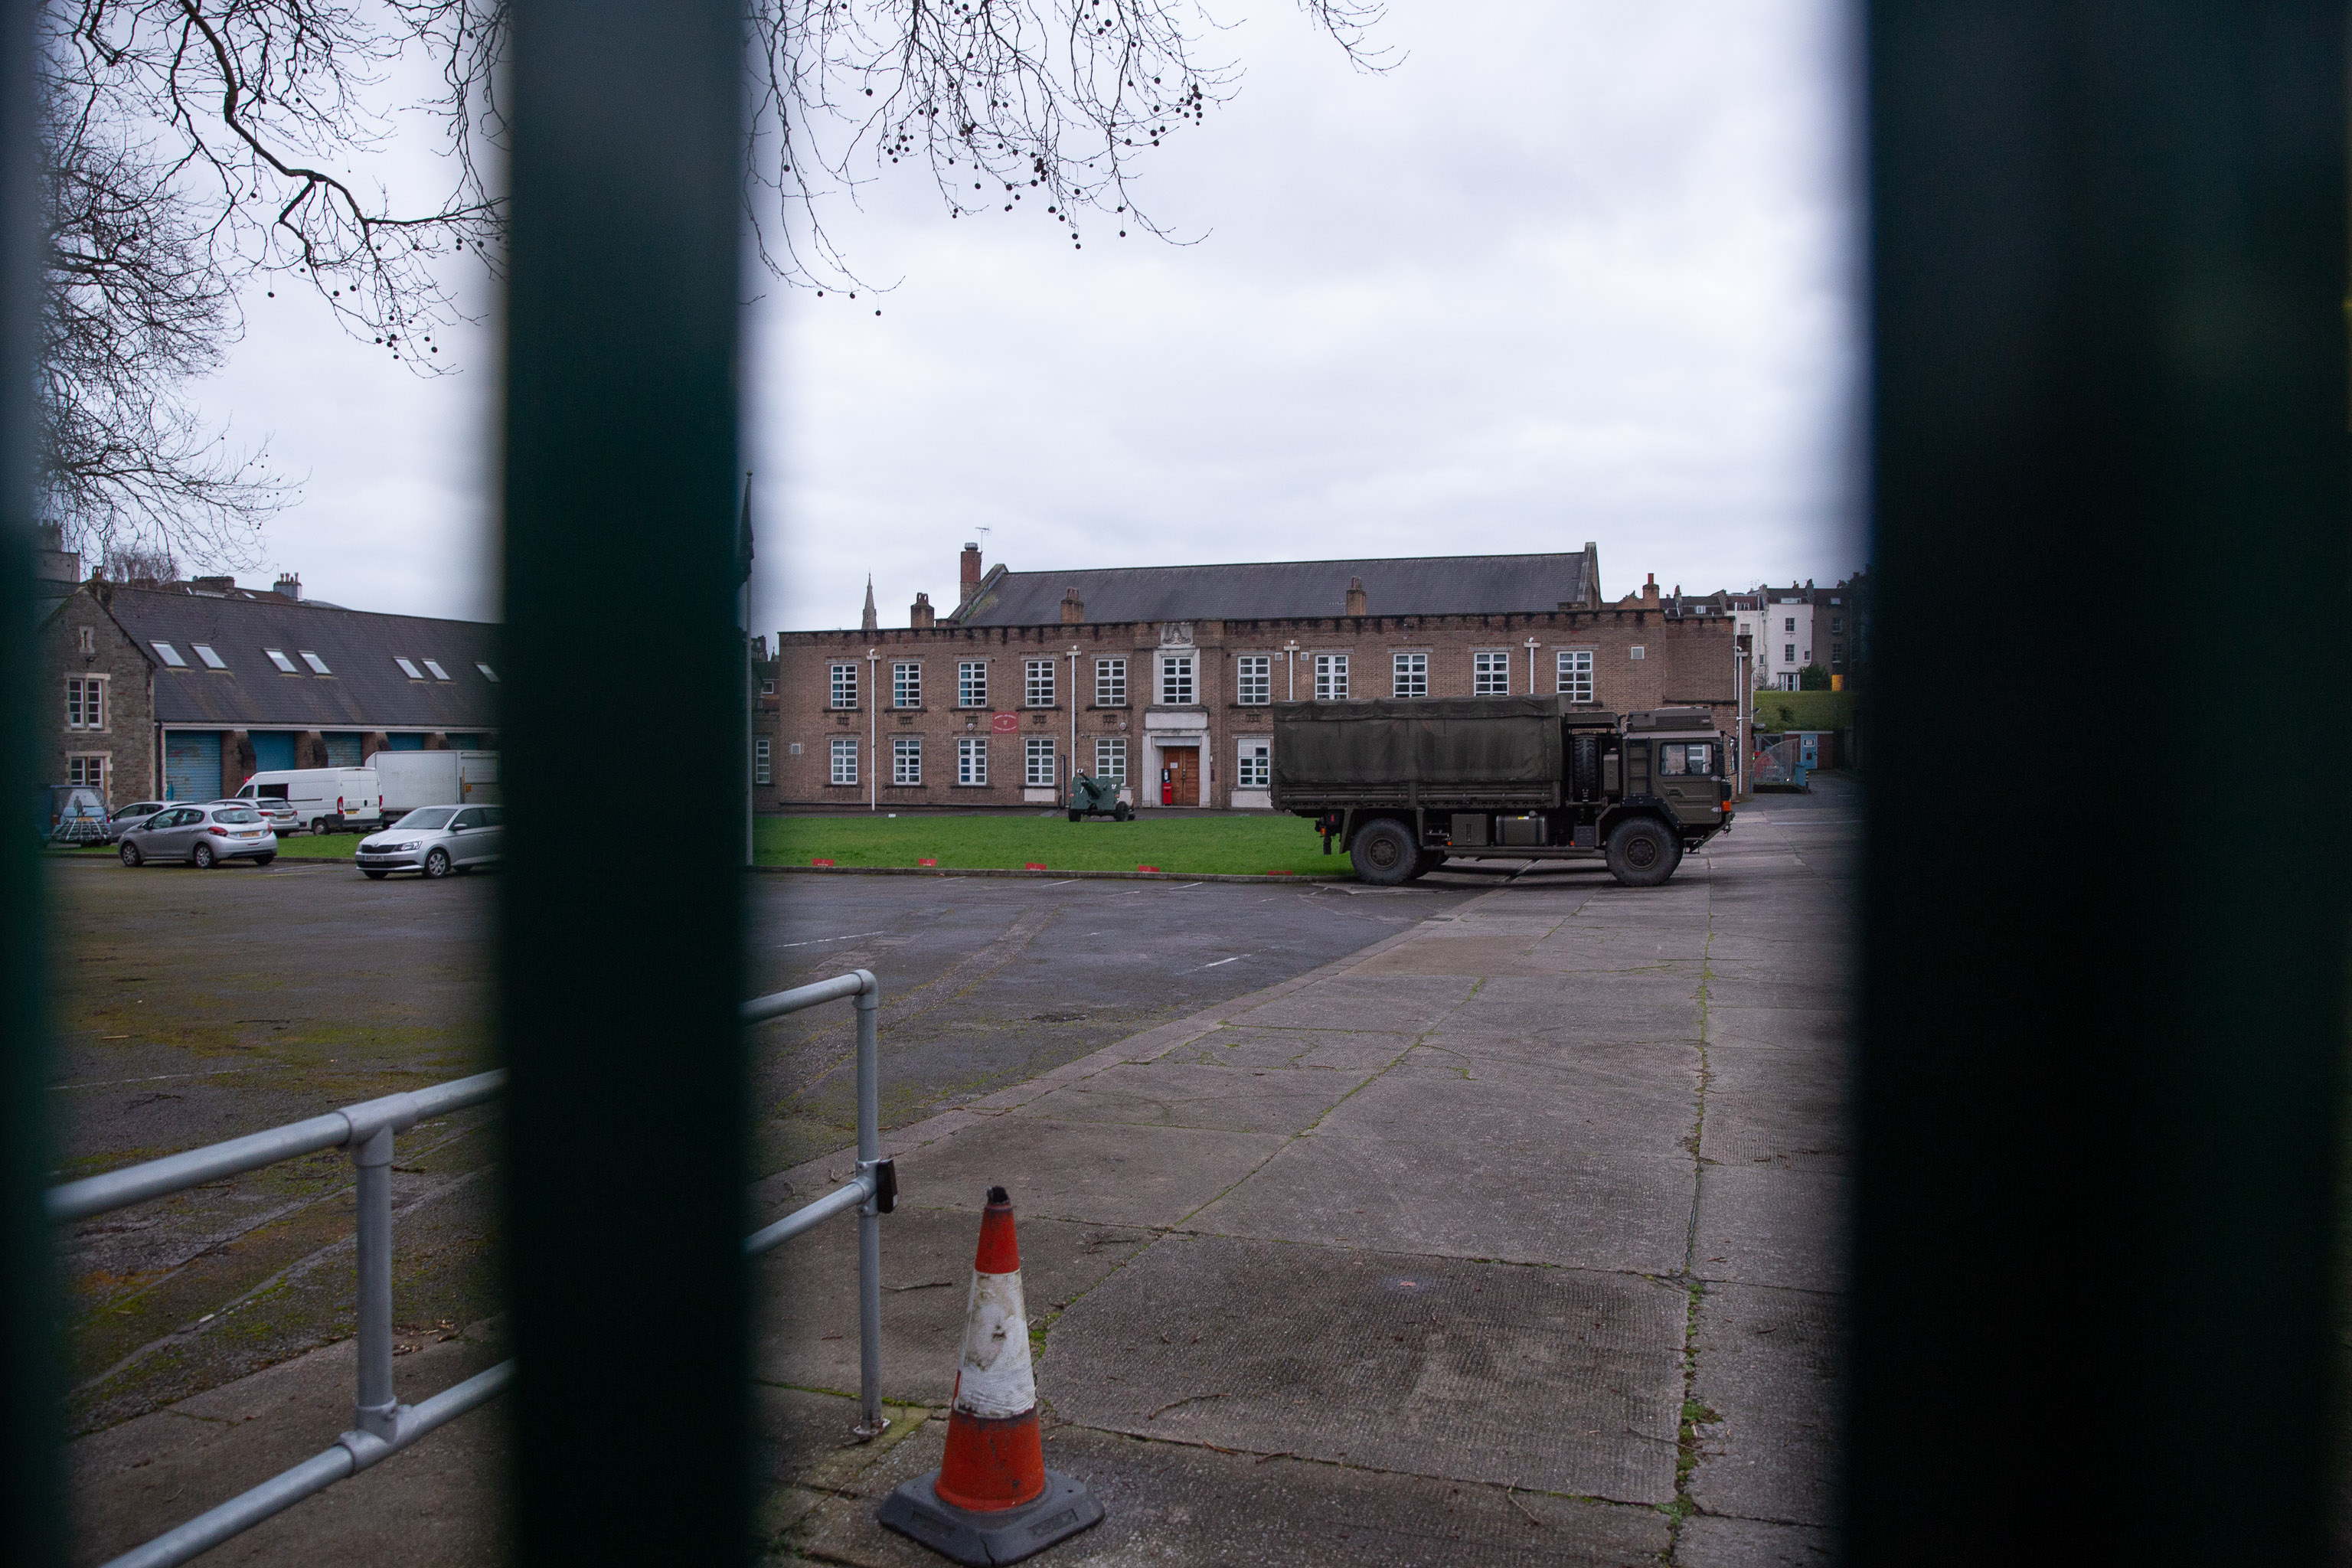 Behind Bars
The Artillery Grounds, Whiteladies Road. The Royal Engineers have a troop here as well as the Royal Artillery.
